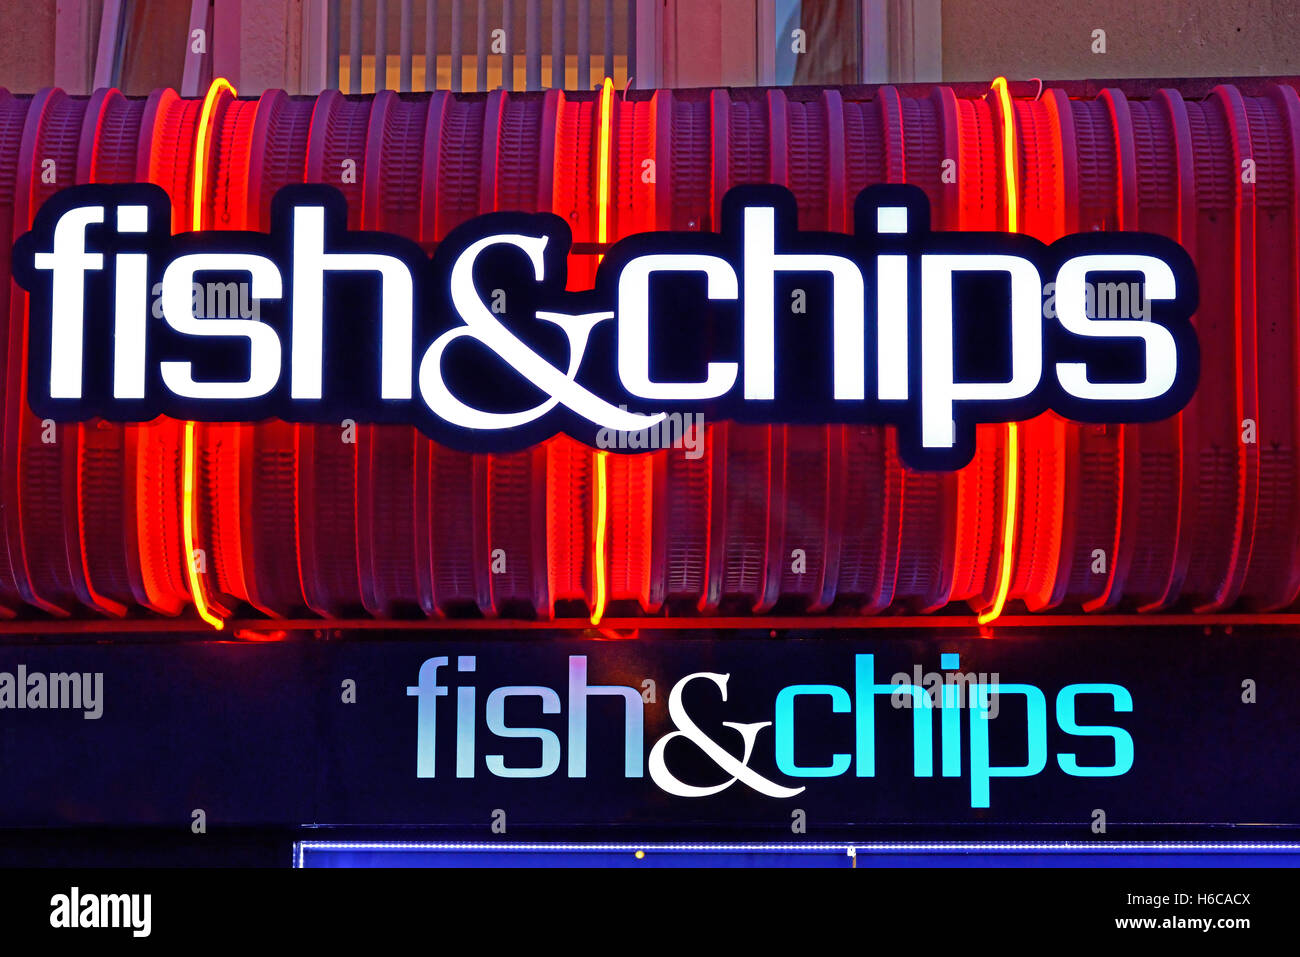 Fish and chips neon sign Whitley Bay Stock Photo